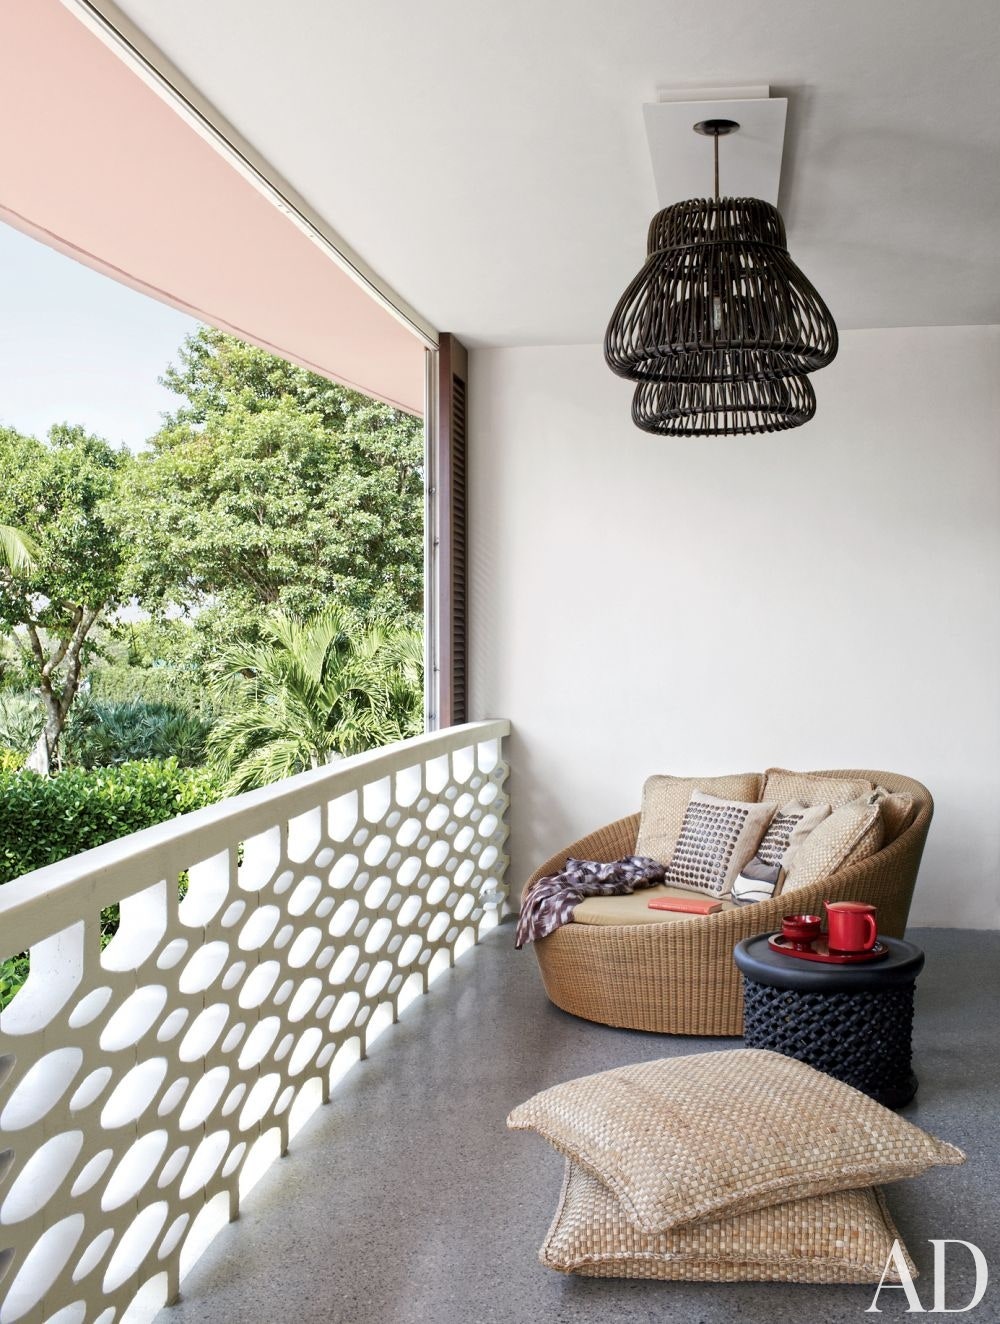 Cute modern balcony designs for your home